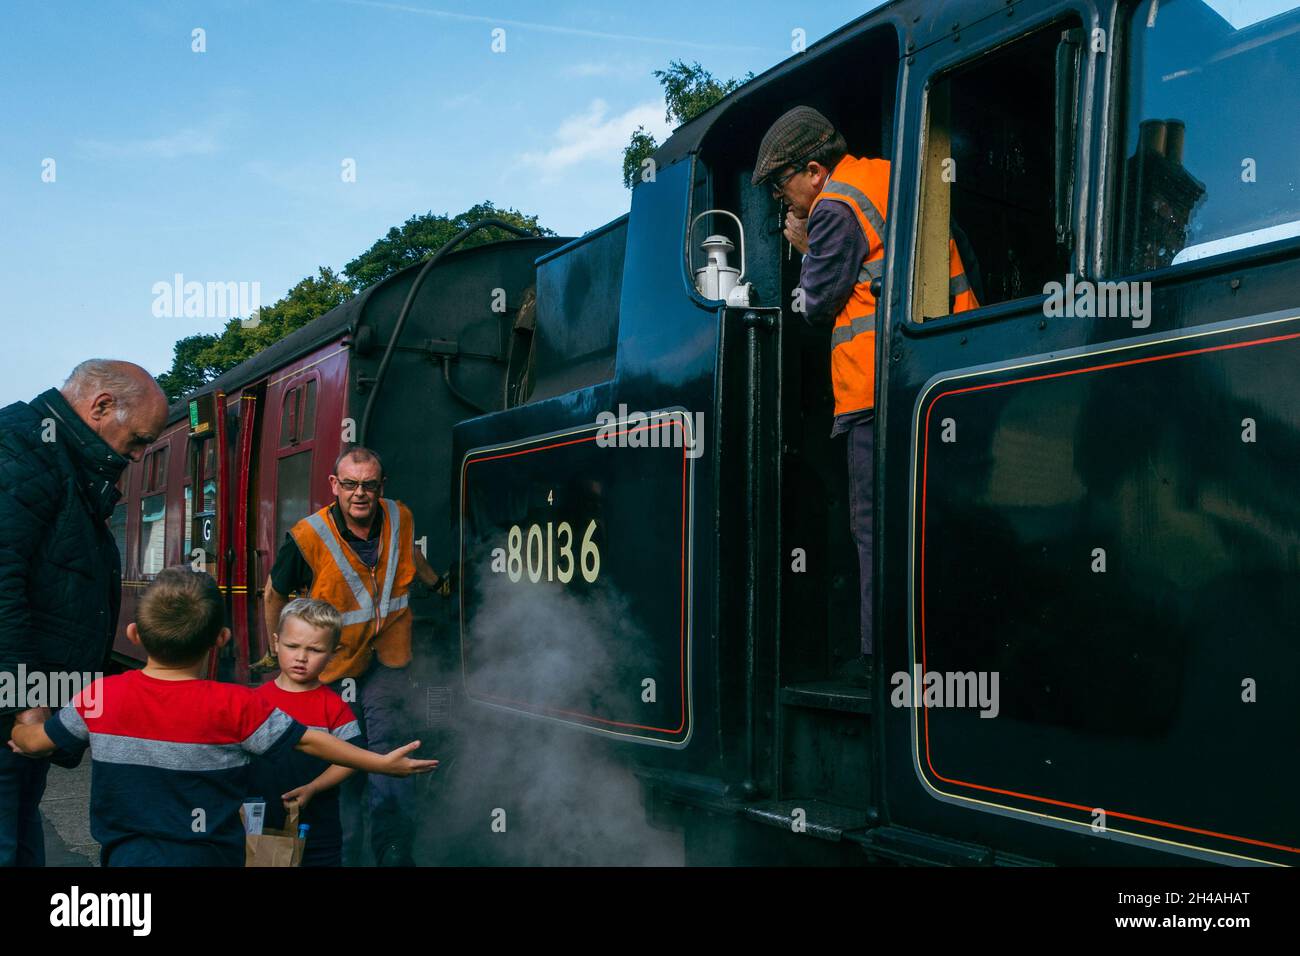 Adult and children enjoying a steam train with friendly train drivers, The Moorlander 8136, Grosmont station, North York Moors heritage railway, UK Stock Photo